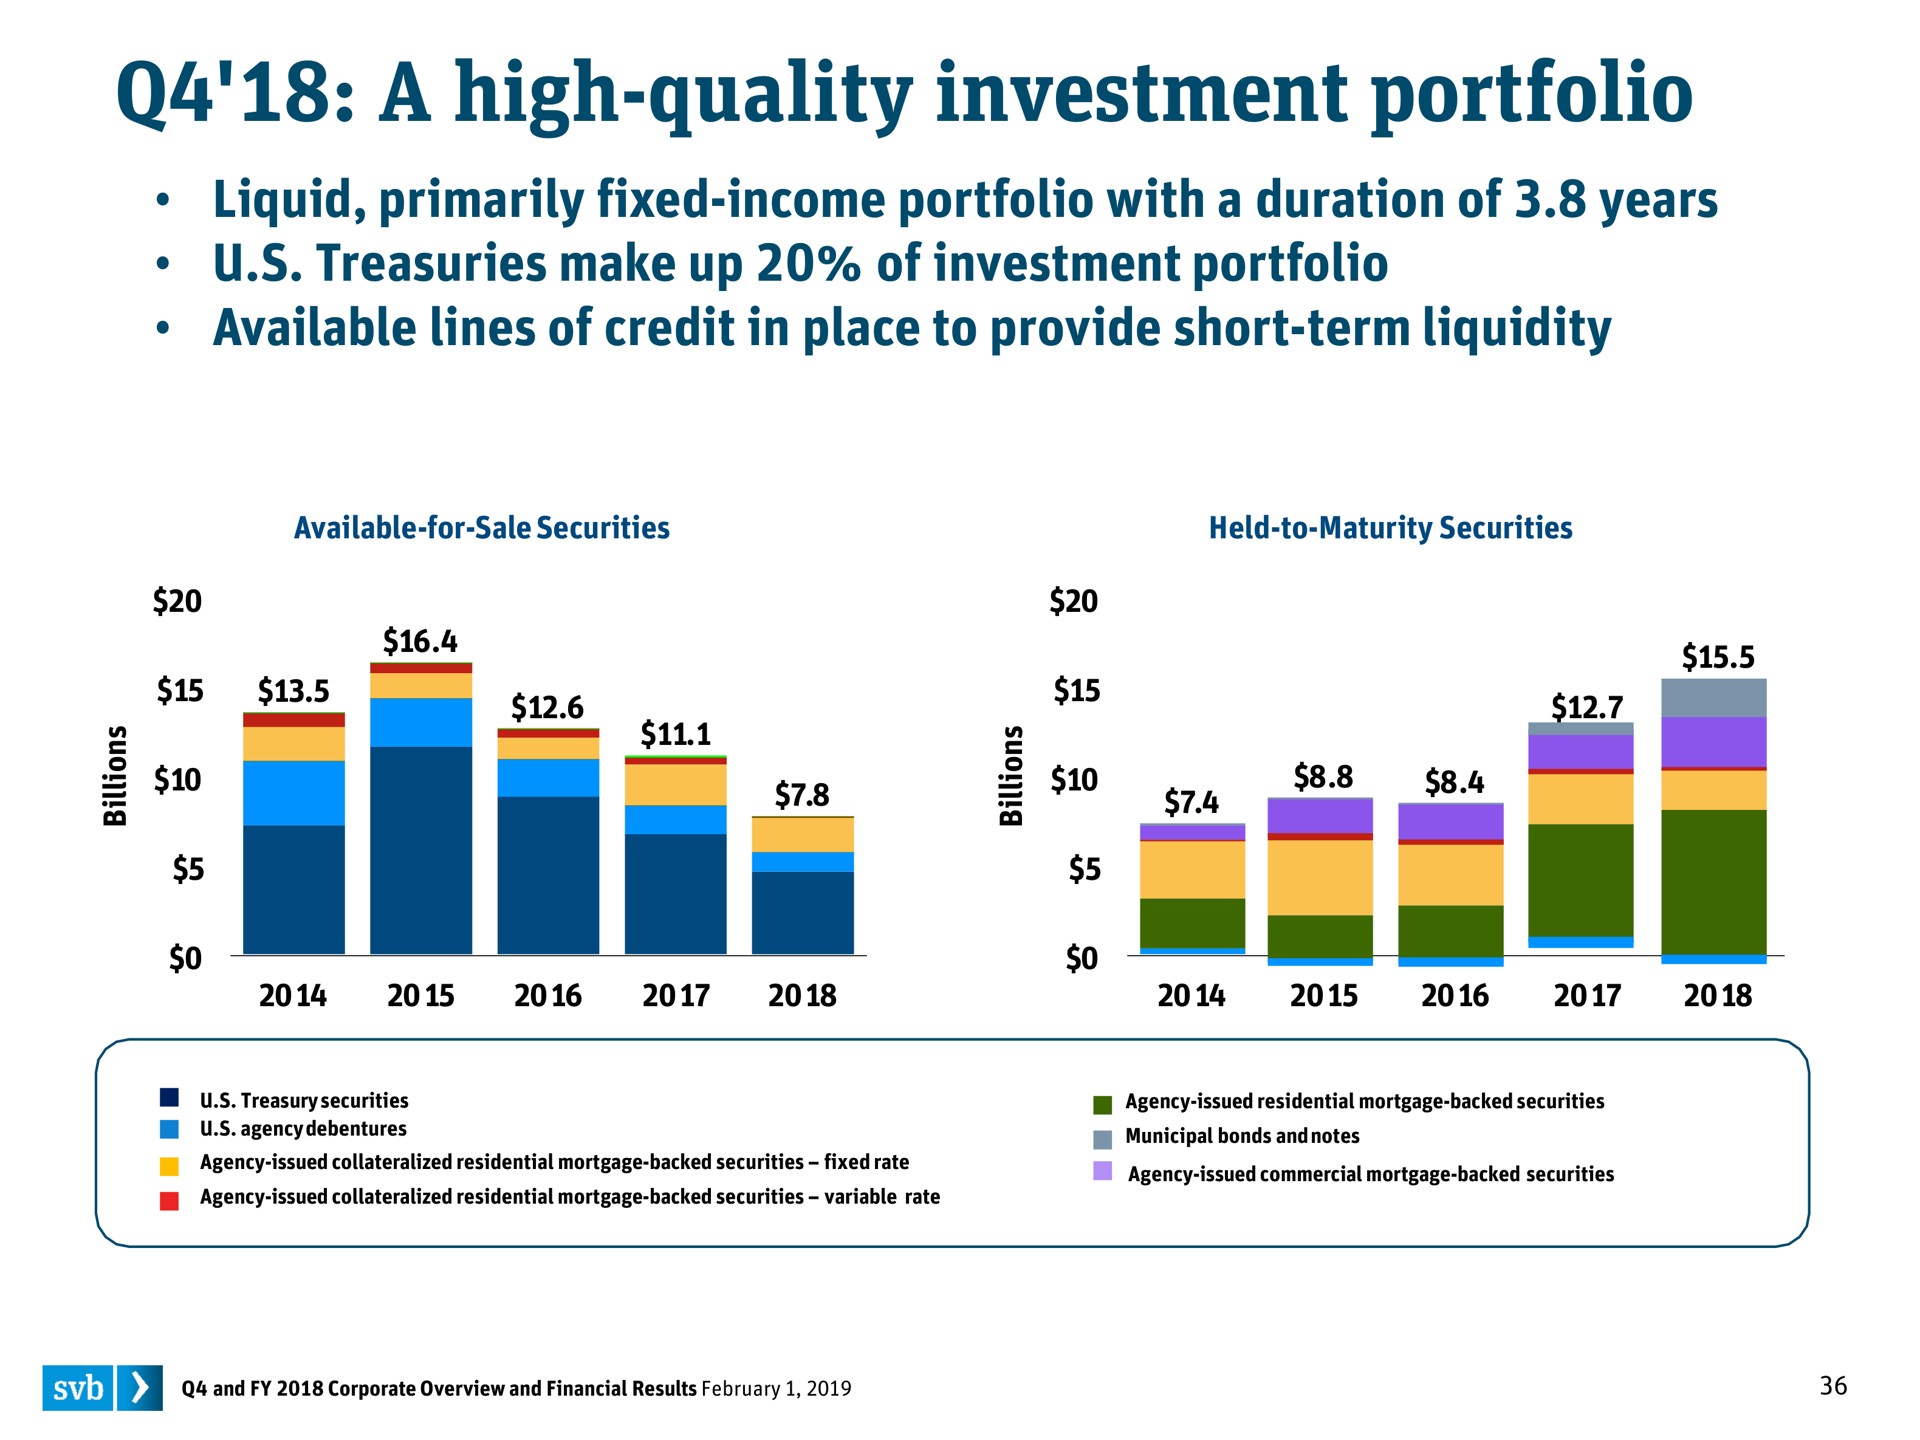 a high quality investment portfolio is | Silicon Valley Bank